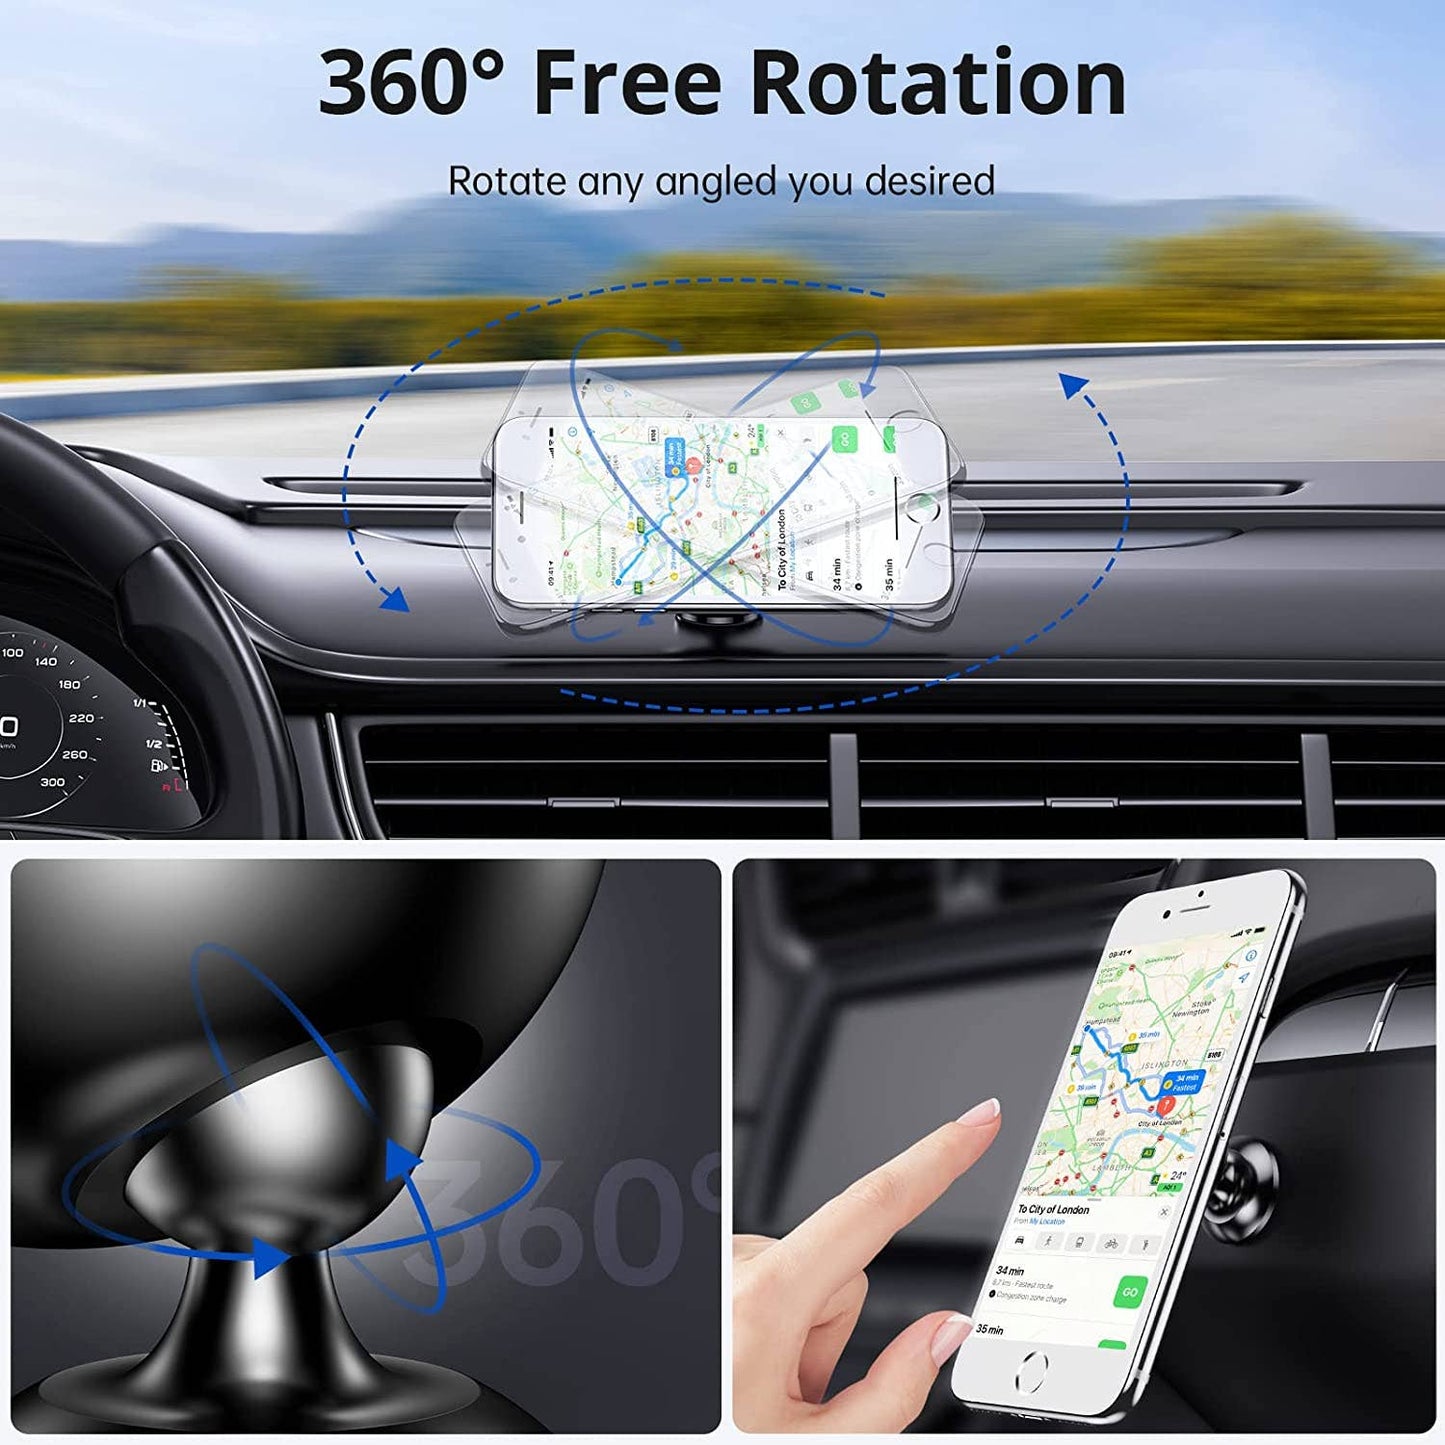 2 Syncwire Magnetic Car Phone Holder for Dashboard, Cell Phone 360° Adjustable Magnet Cell Phone Mount Compatible with iPhone, Samsung, LG, GPS, Mini Tablet and More